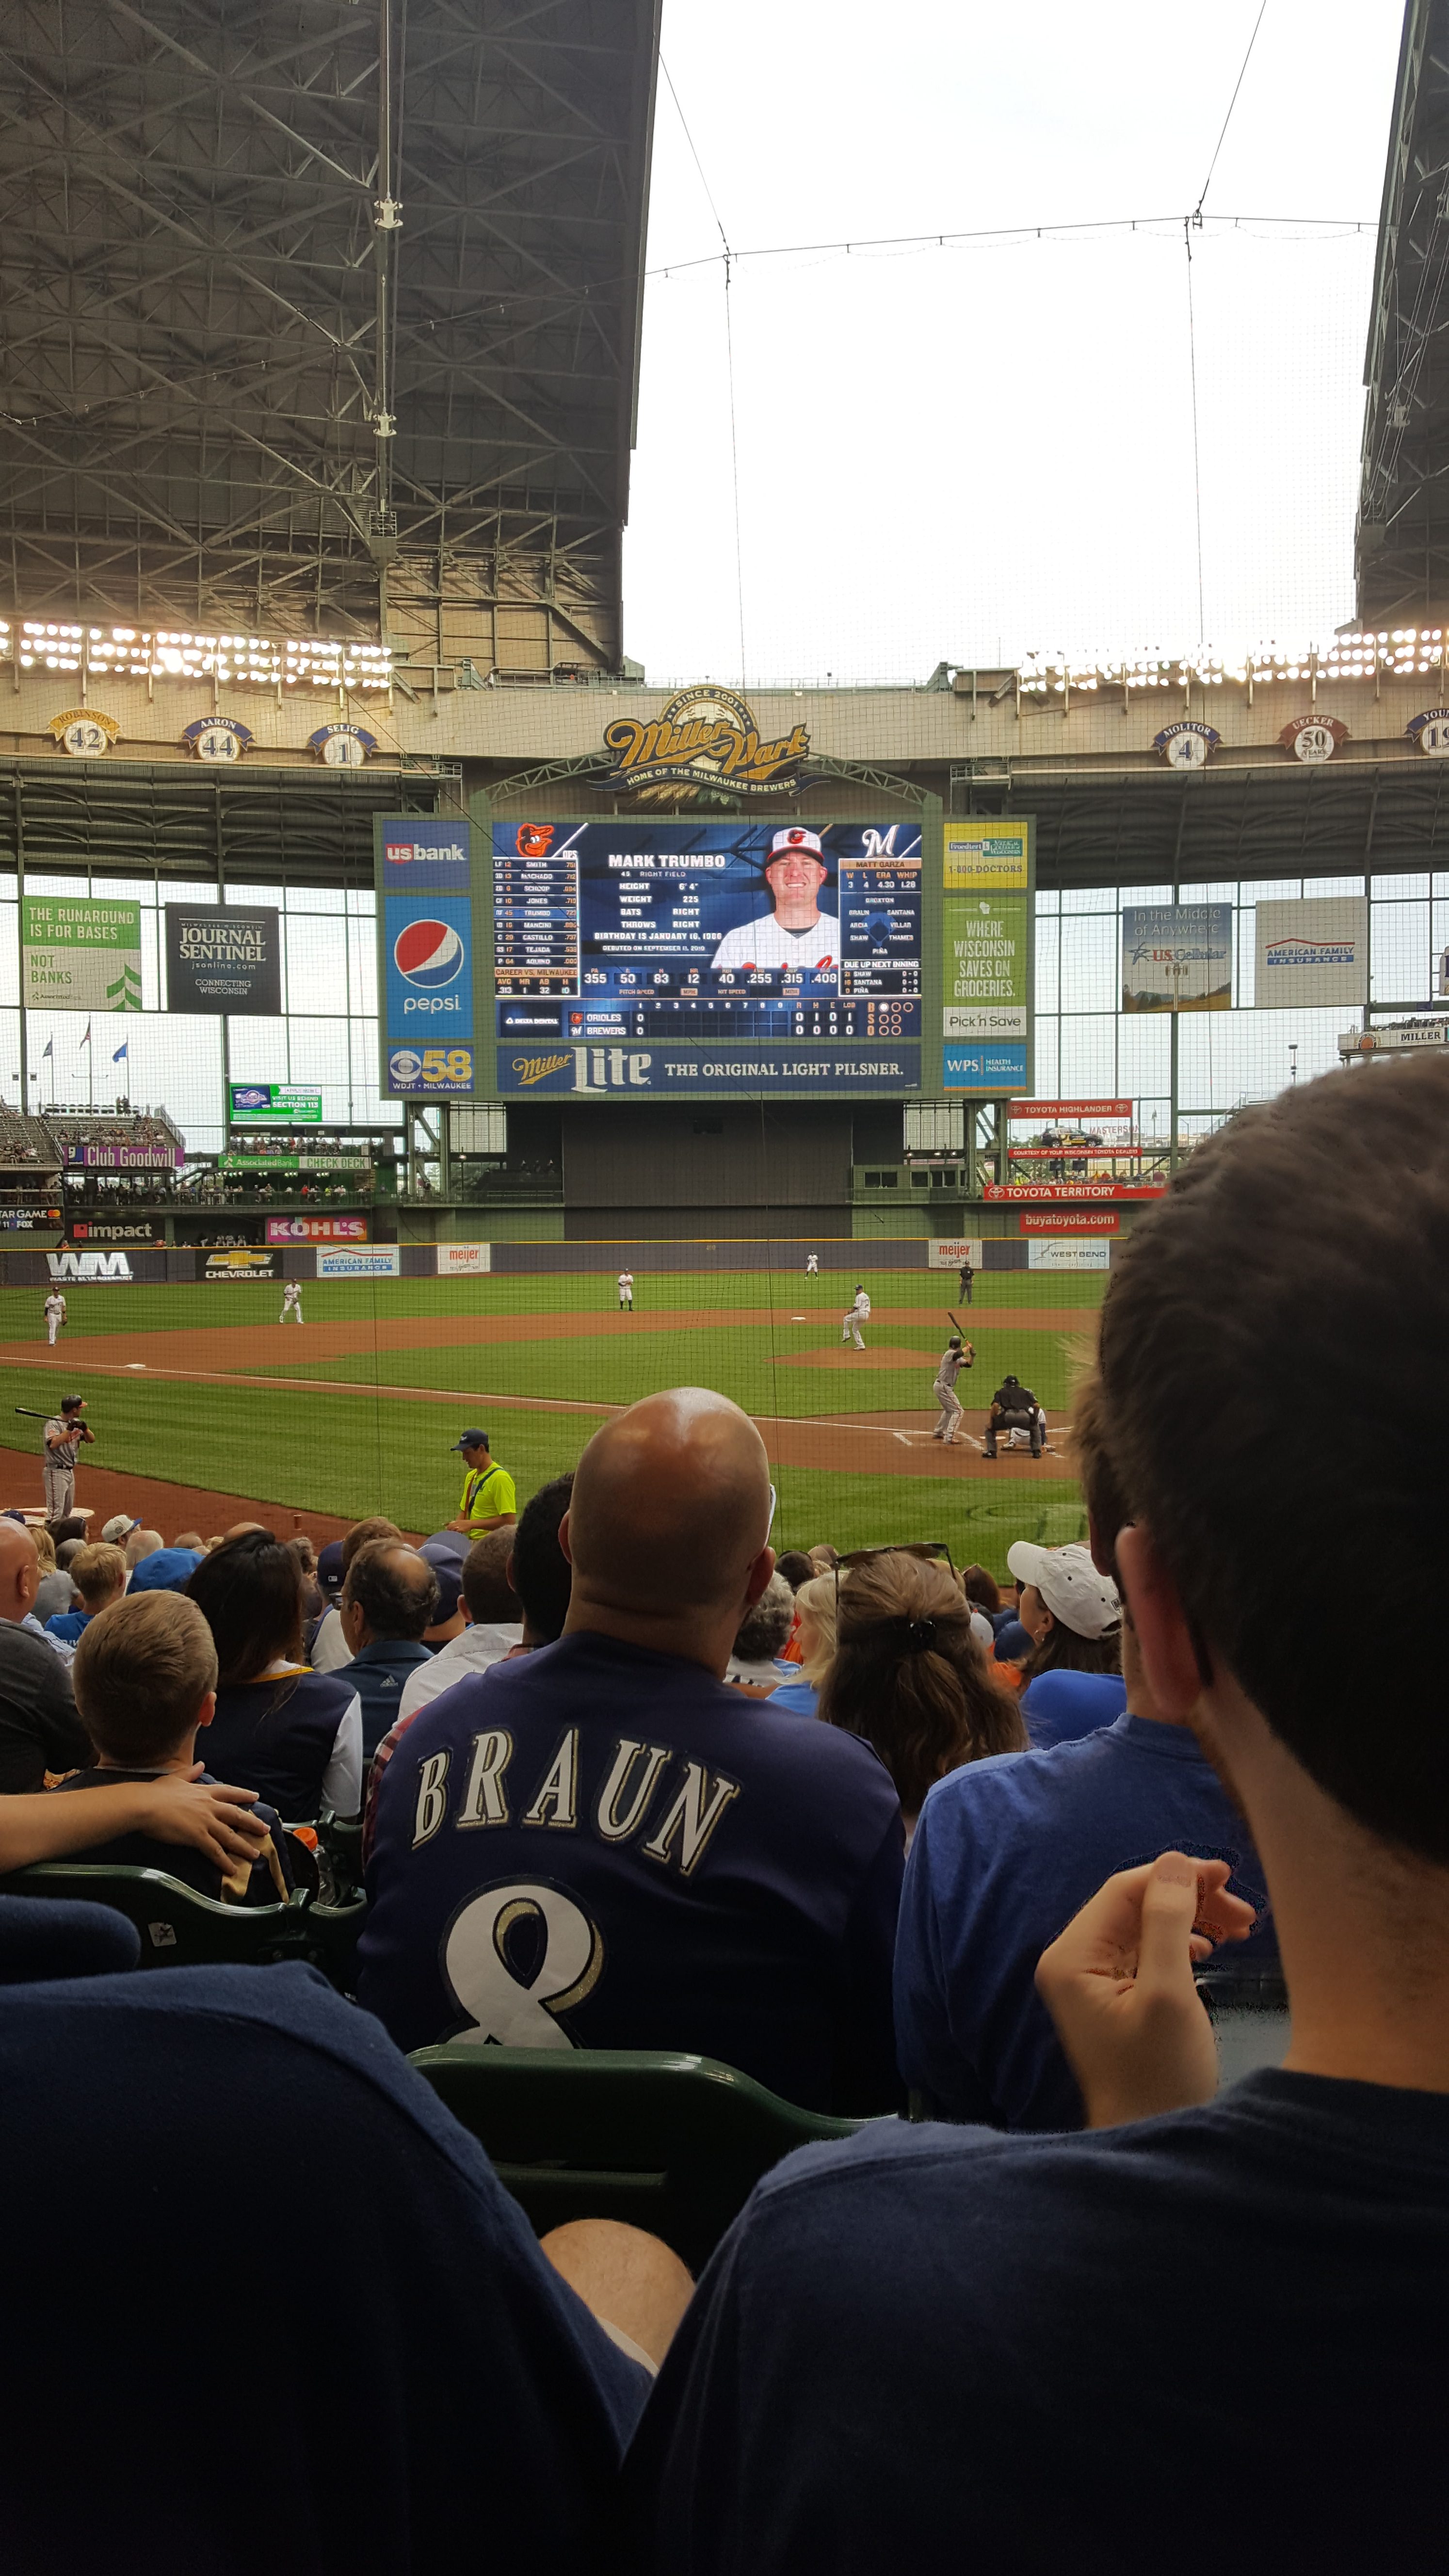 Brewers Game 7.5.17 | https://www.roseclearfield.com